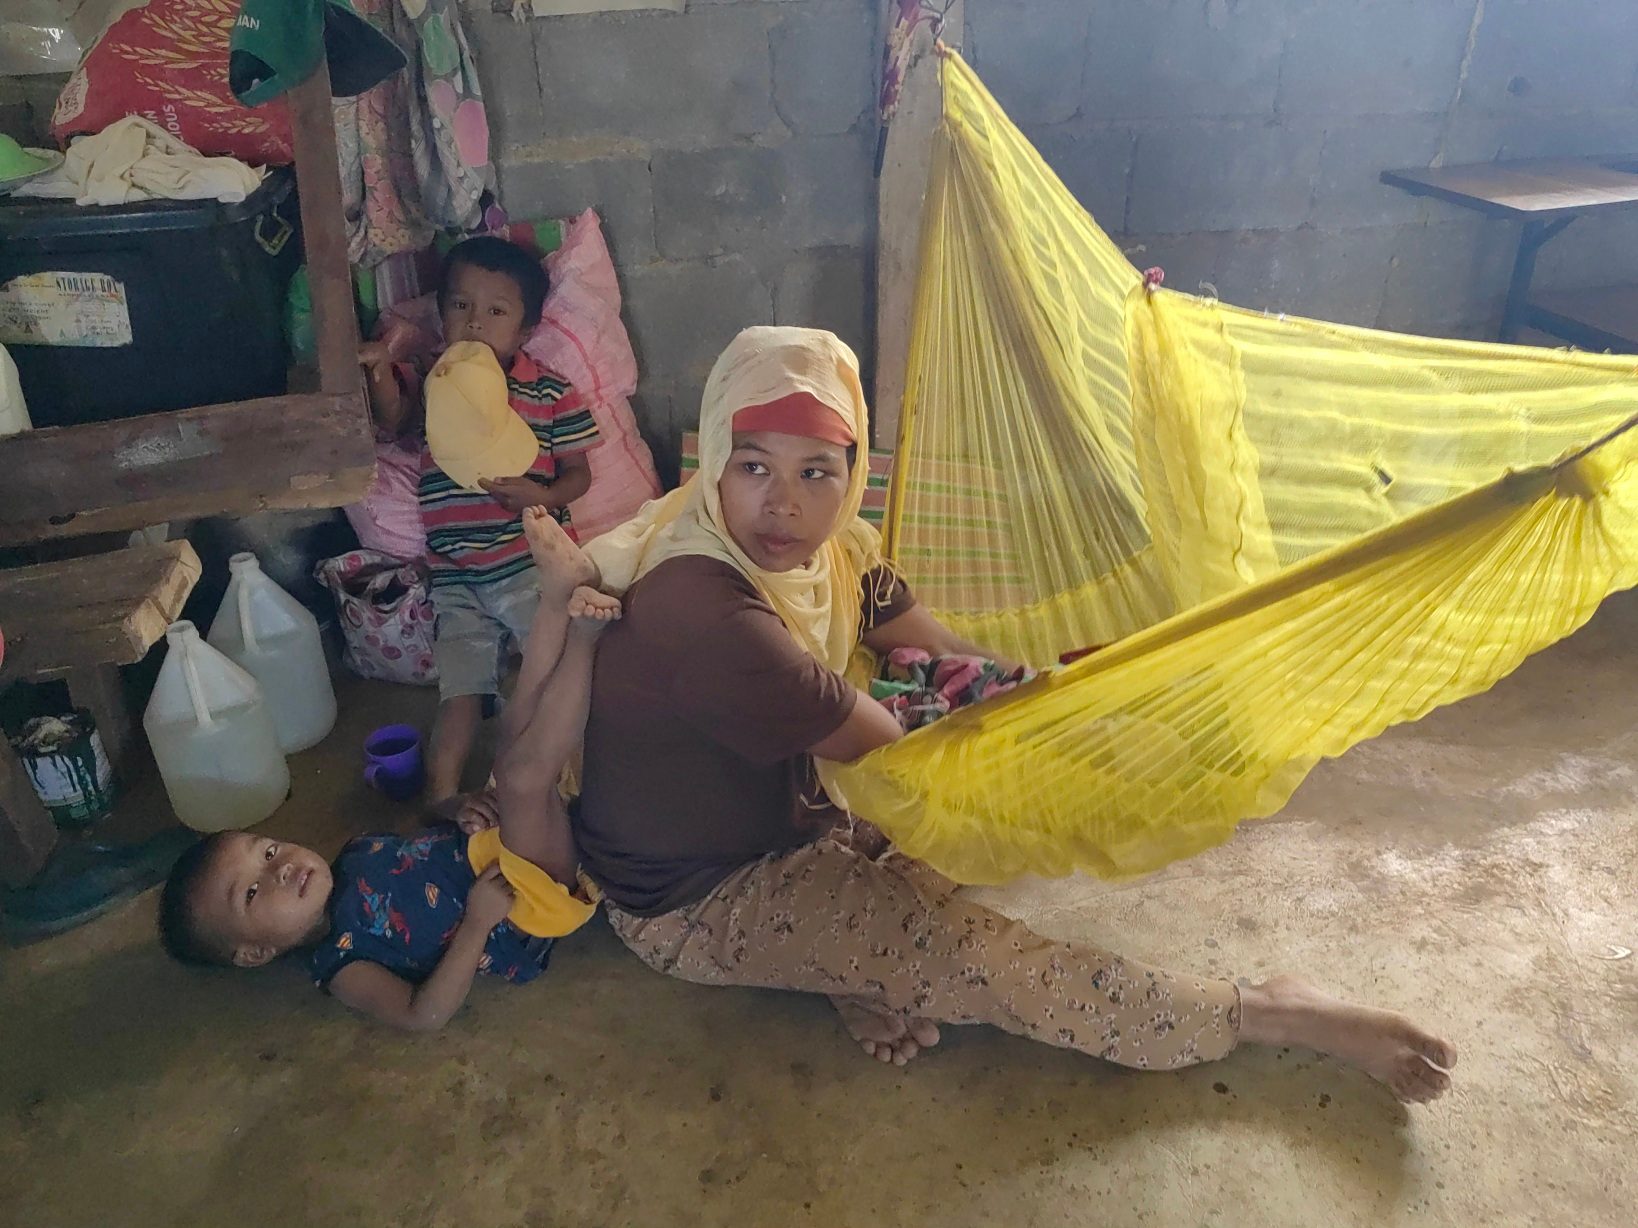 On World IP Day, displaced Teduray families yearn for peace in Maguindanao del Sur